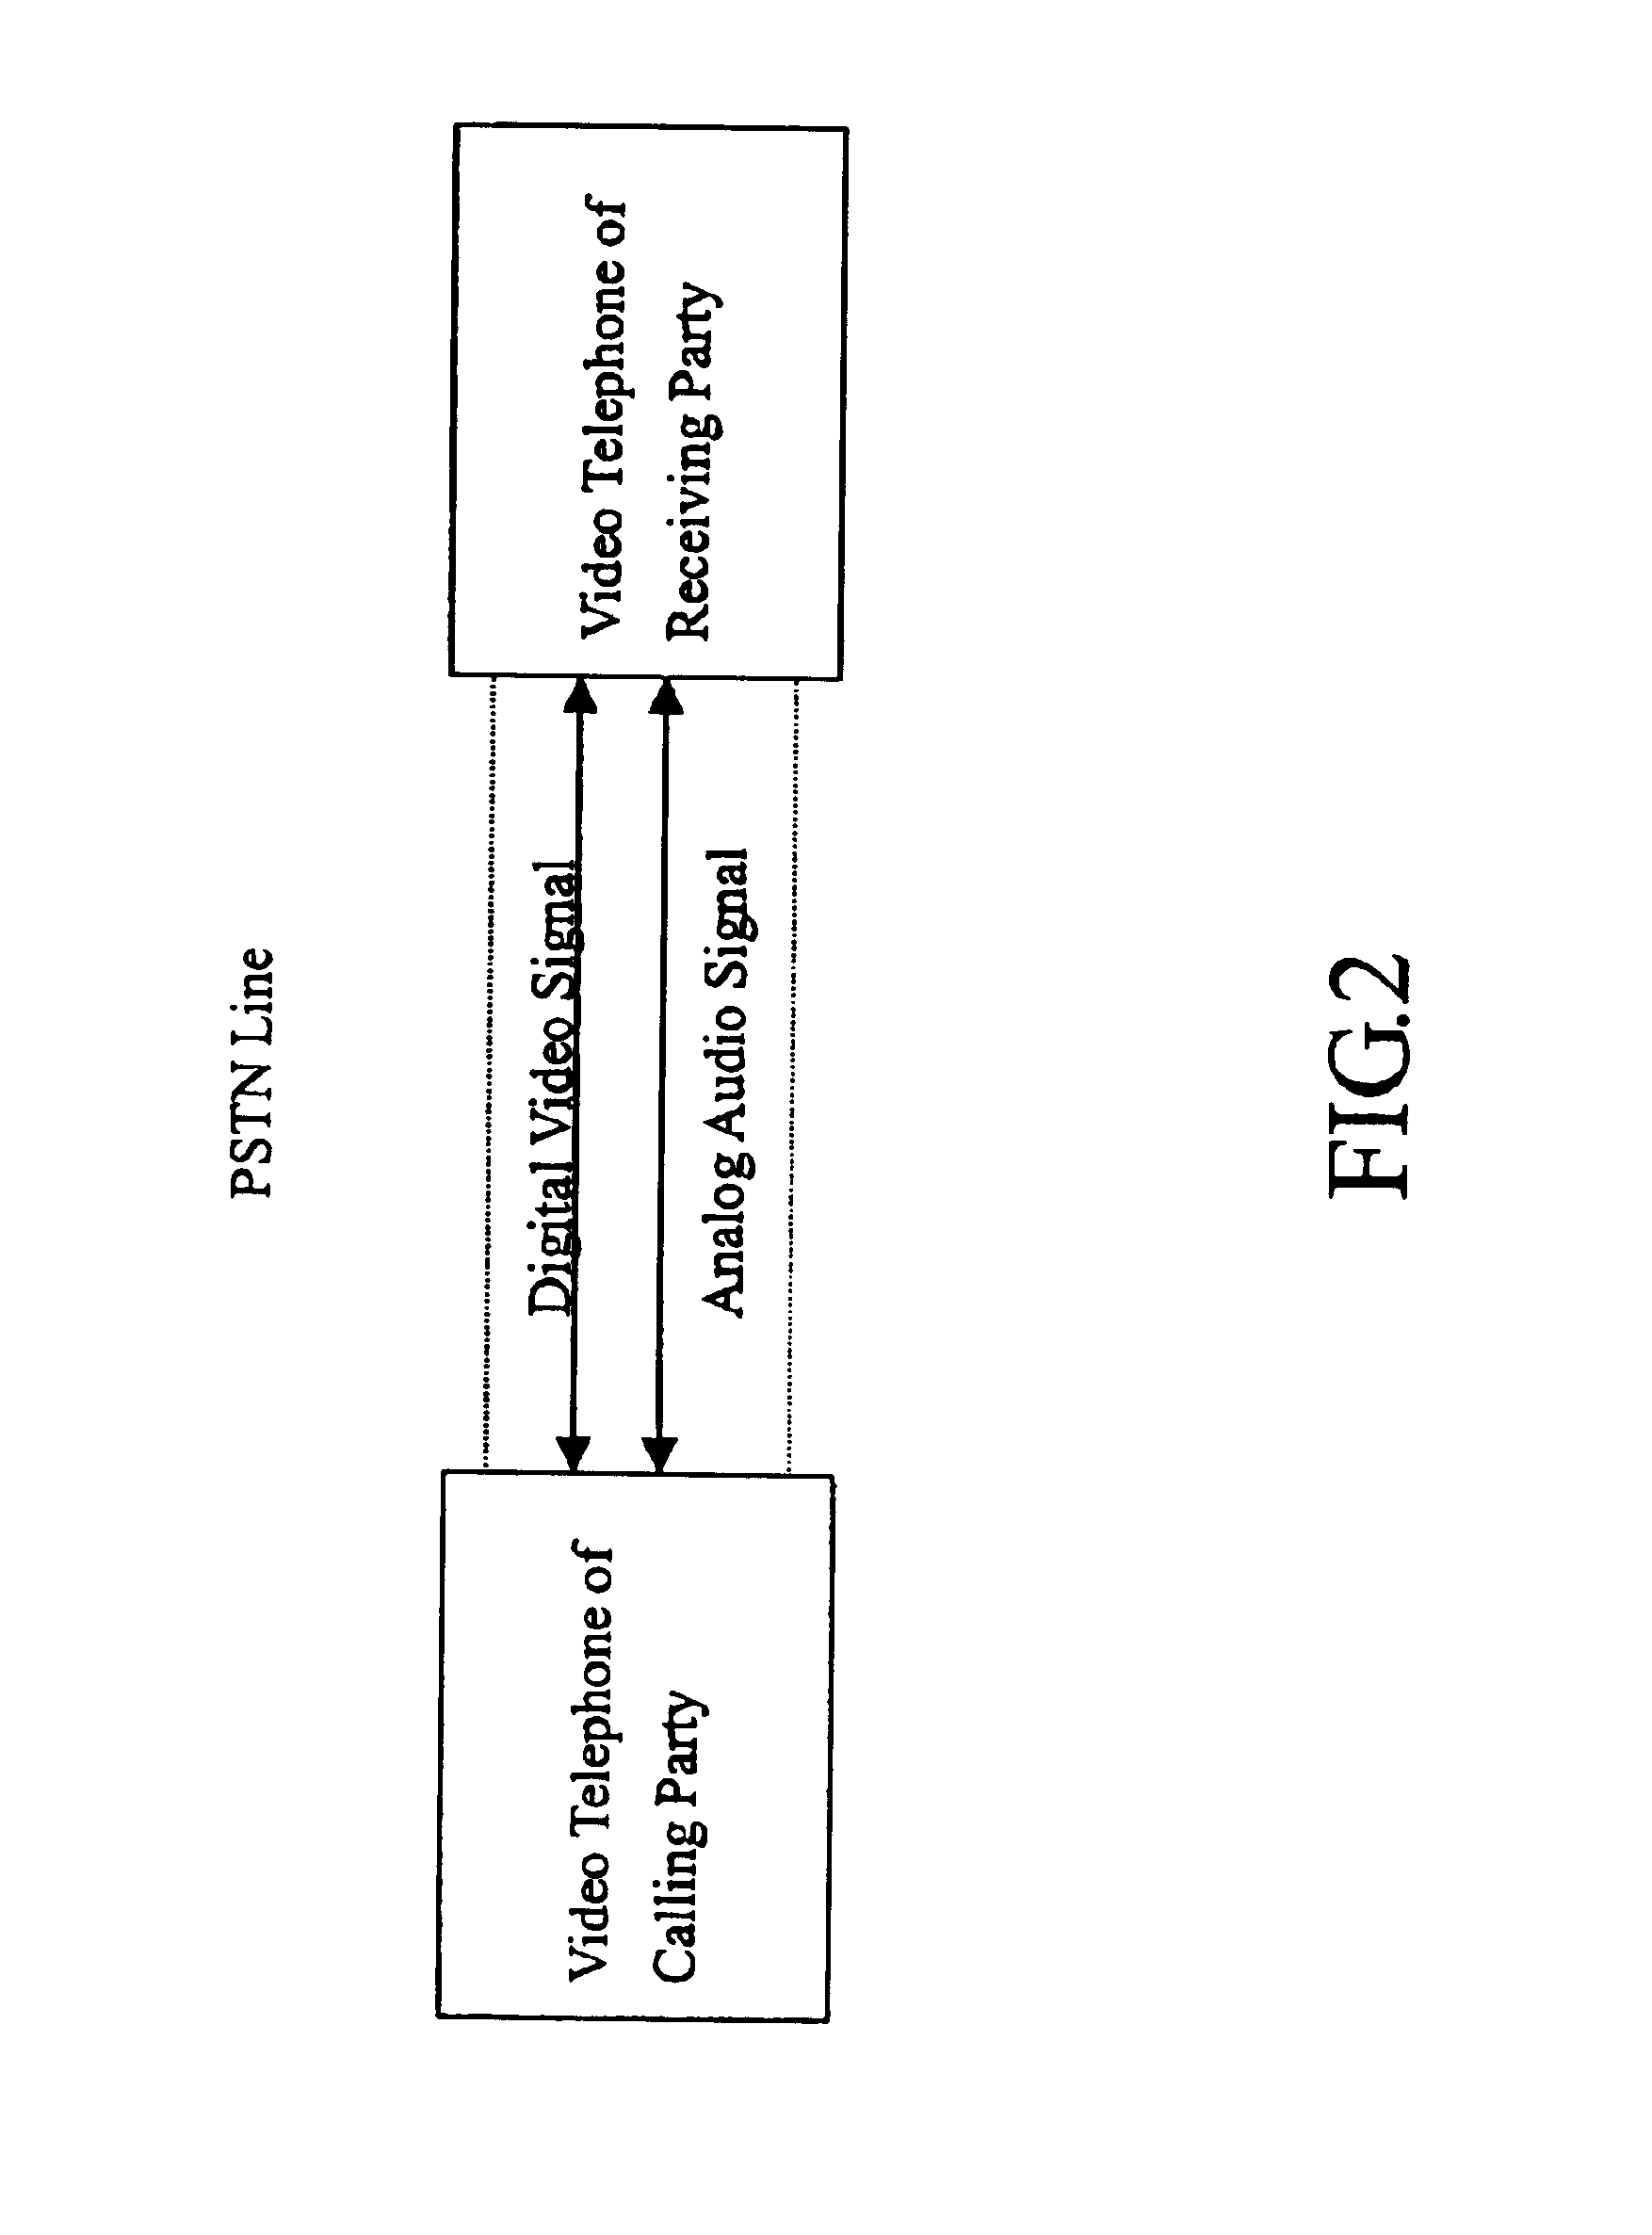 Video telephone integrating public-switch telephone network and asymmetric digital subscriber line